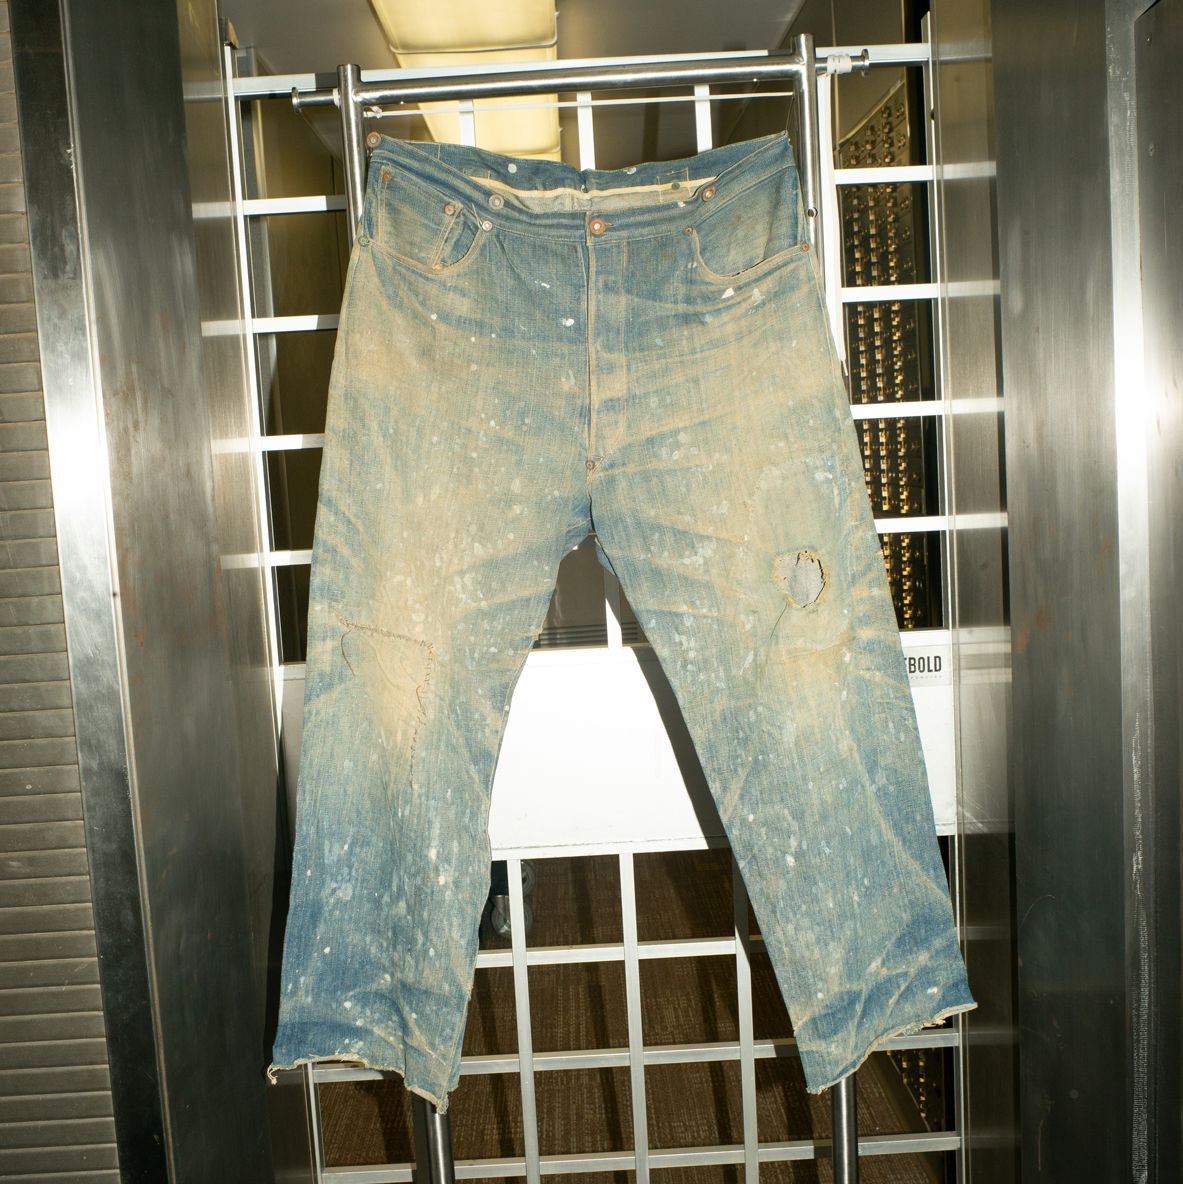 Would You Pay P8000 For This Pair Of Jeans?